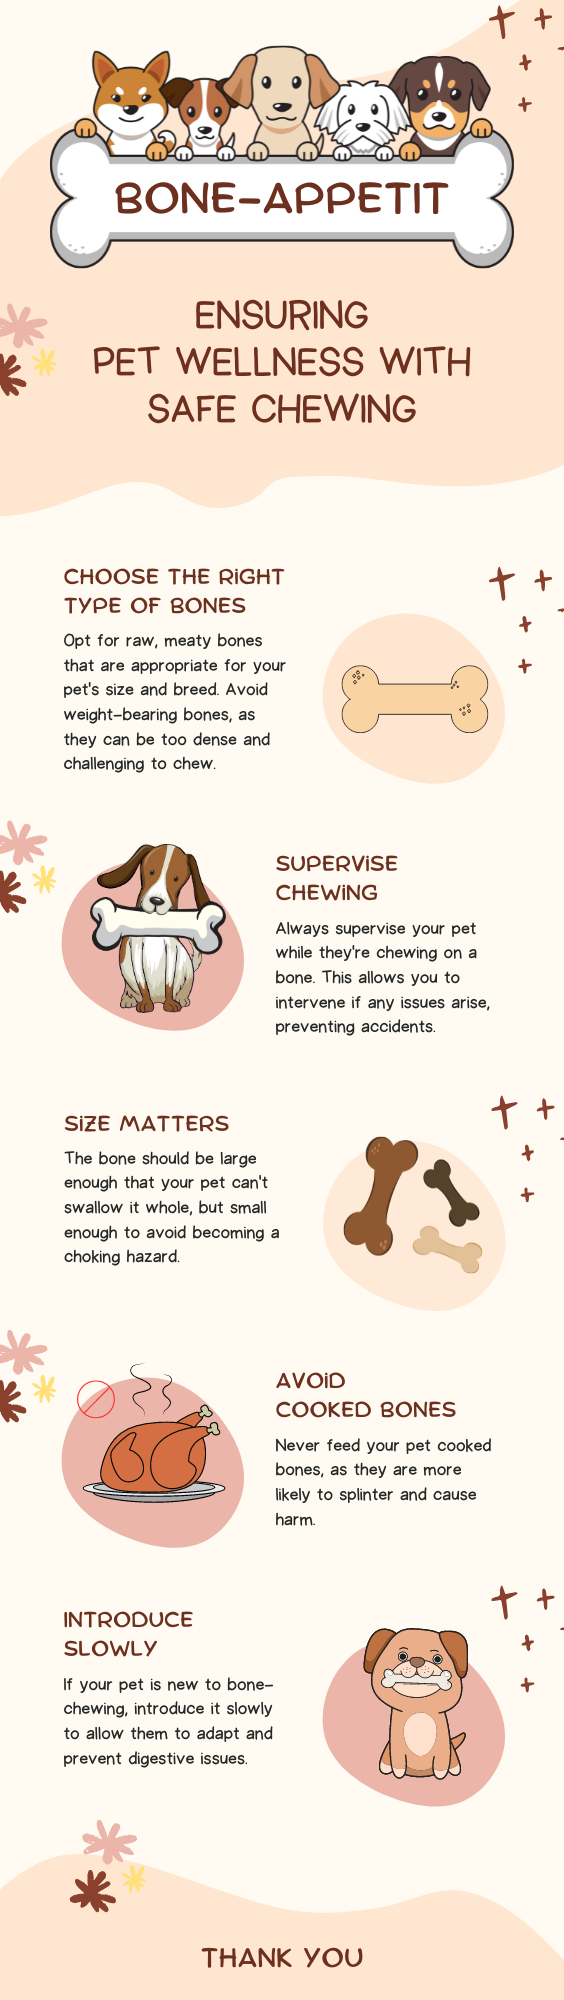 Bone Appetit Ensuring Pet Wellness with Safe Chewing